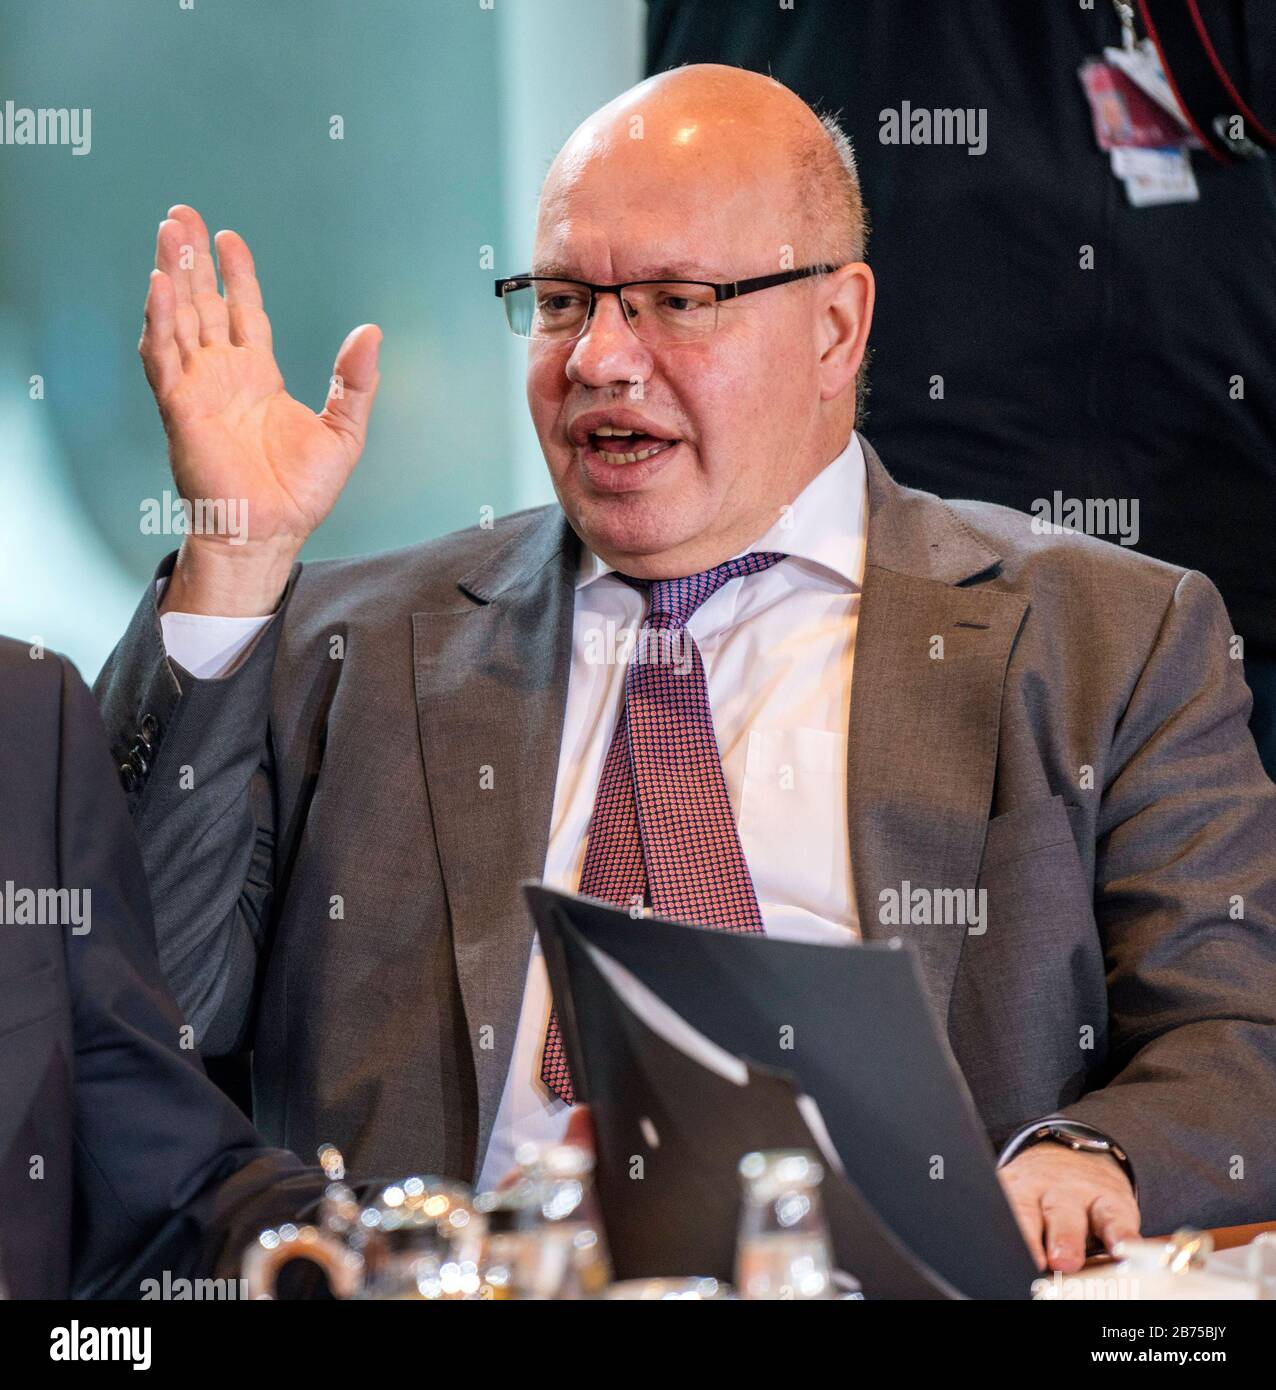 Germany, Berlin, 12.12.2018. Cabinet meeting at the Federal Chancellery in Berlin on 12.12.2018. Peter Altmaier (CDU), Federal Minister of Economics and Energy. [automated translation] Stock Photo